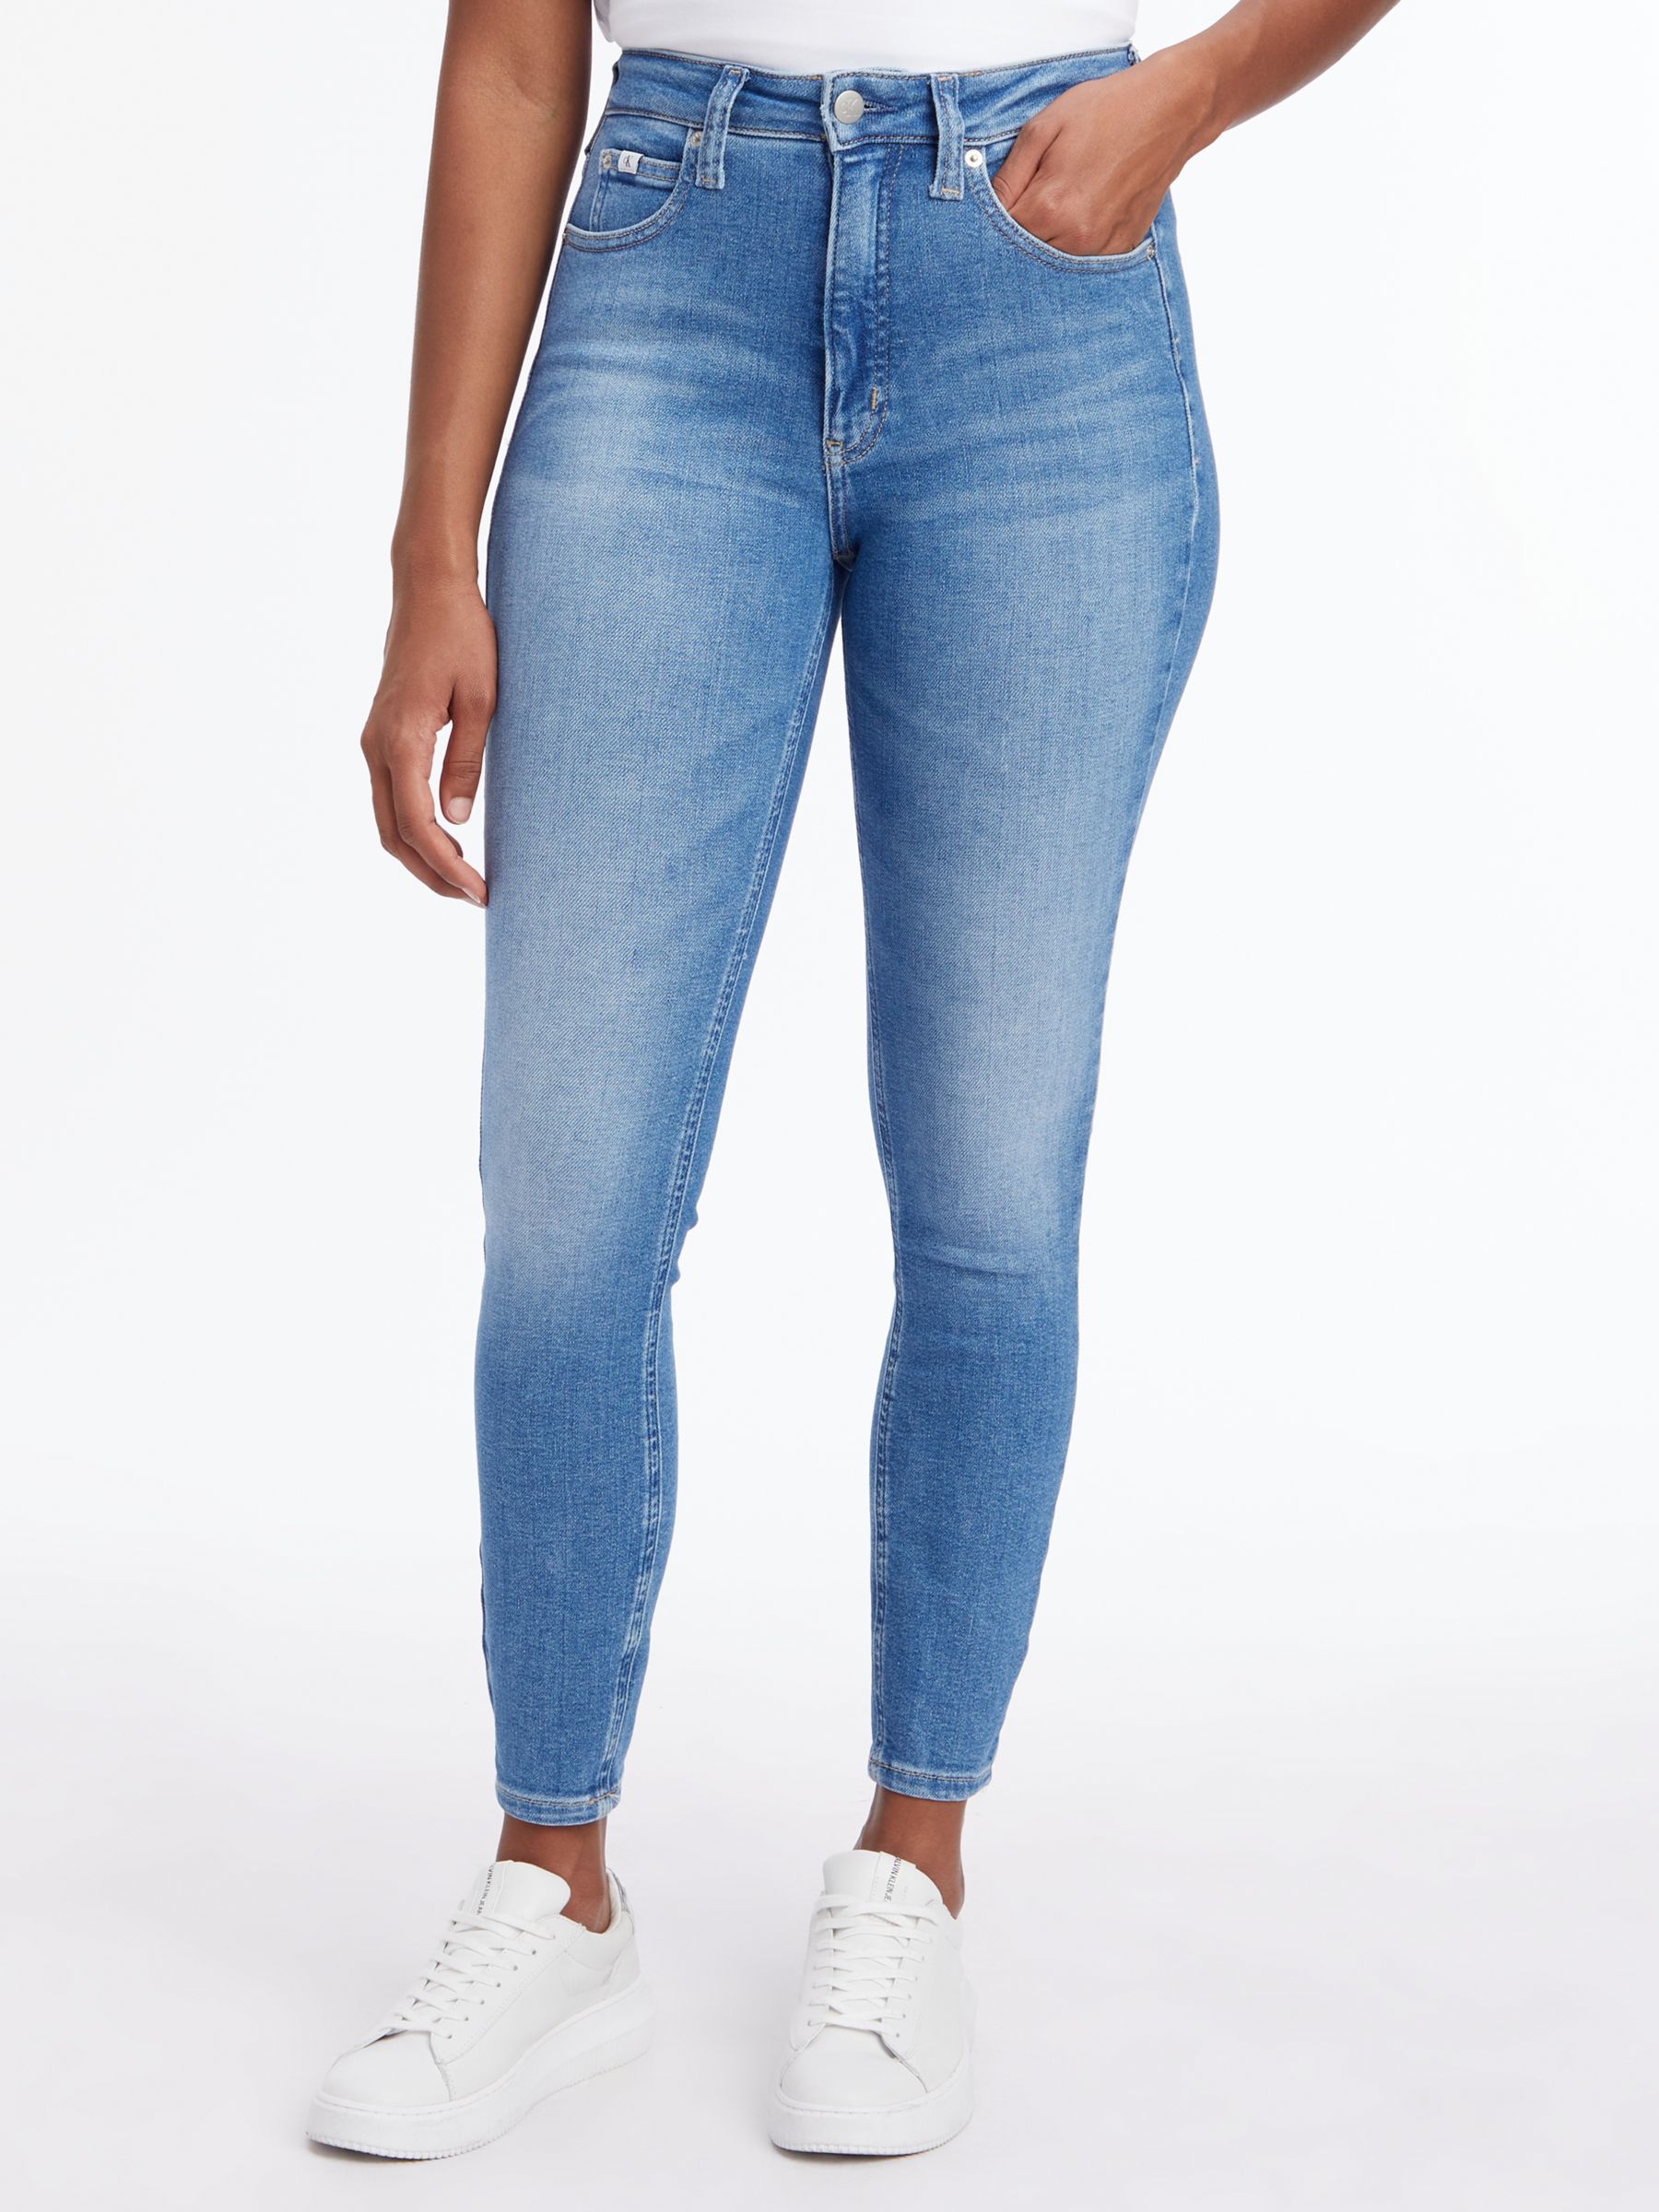 Calvin Klein Jeans 010 HIGH RISE SKINNY ANKLE - Jeans Skinny Fit